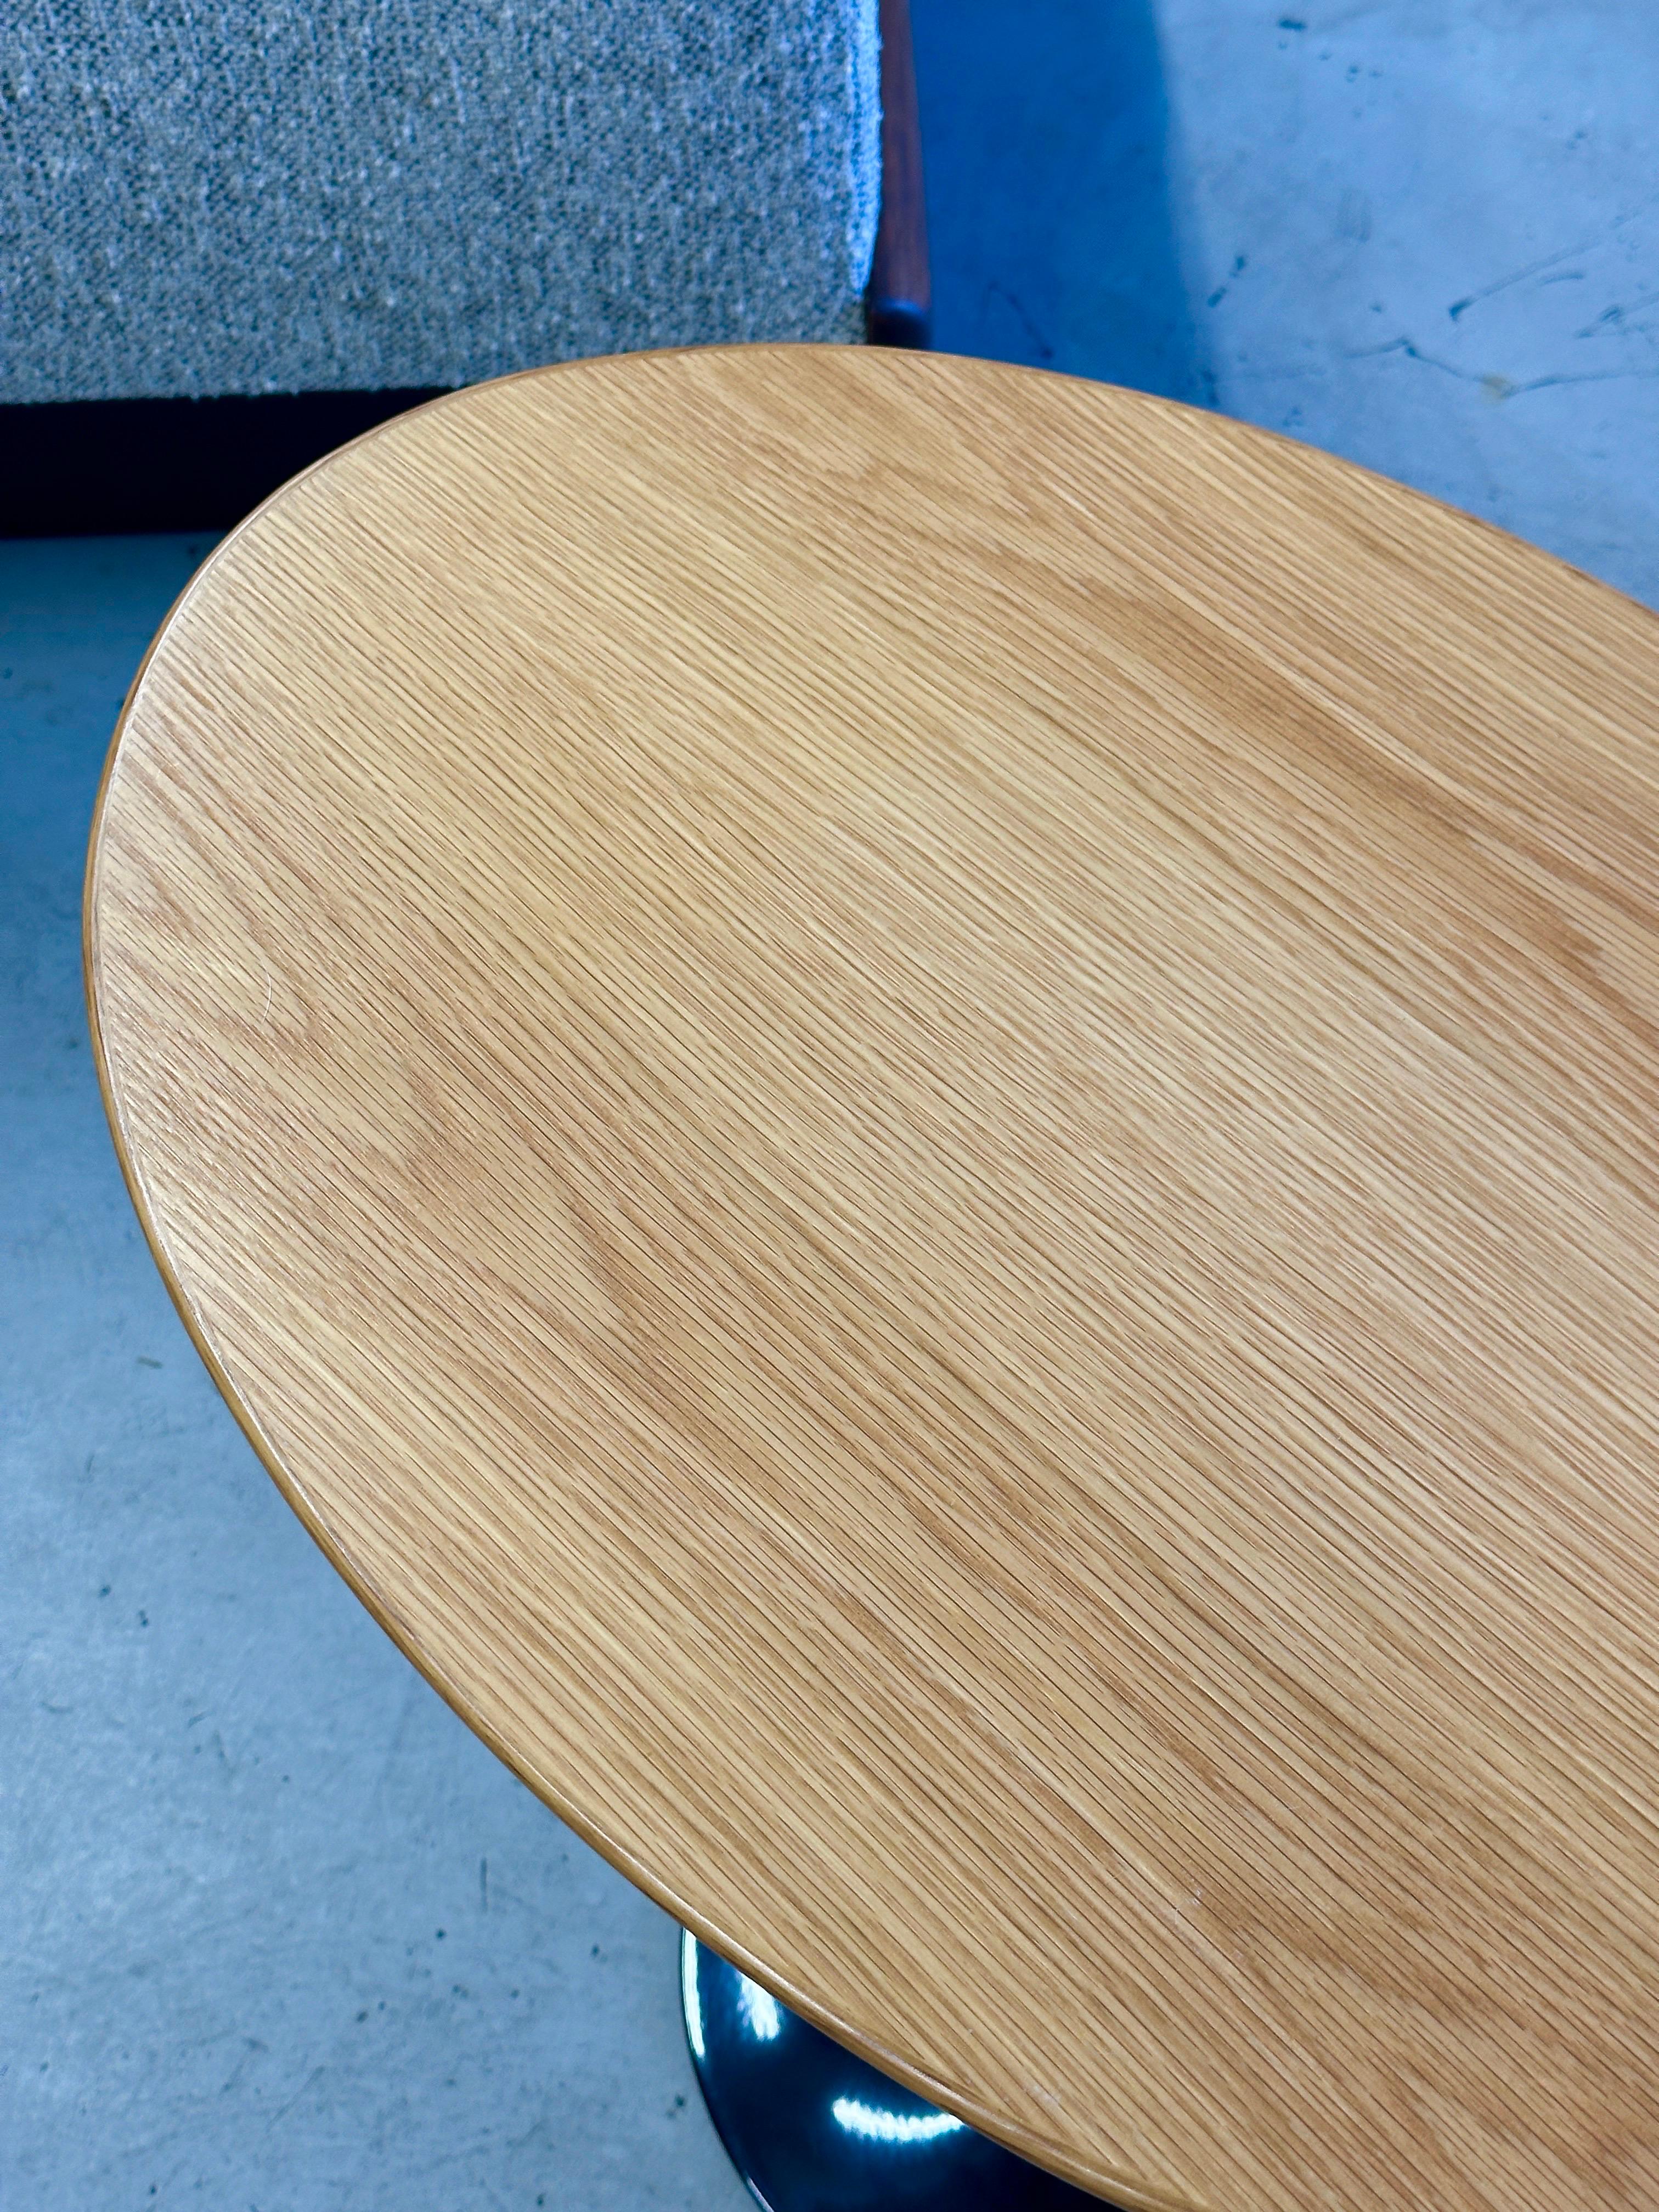 Eero Saarinen for Knoll Oval Tulip Table in Oak and Black For Sale 8